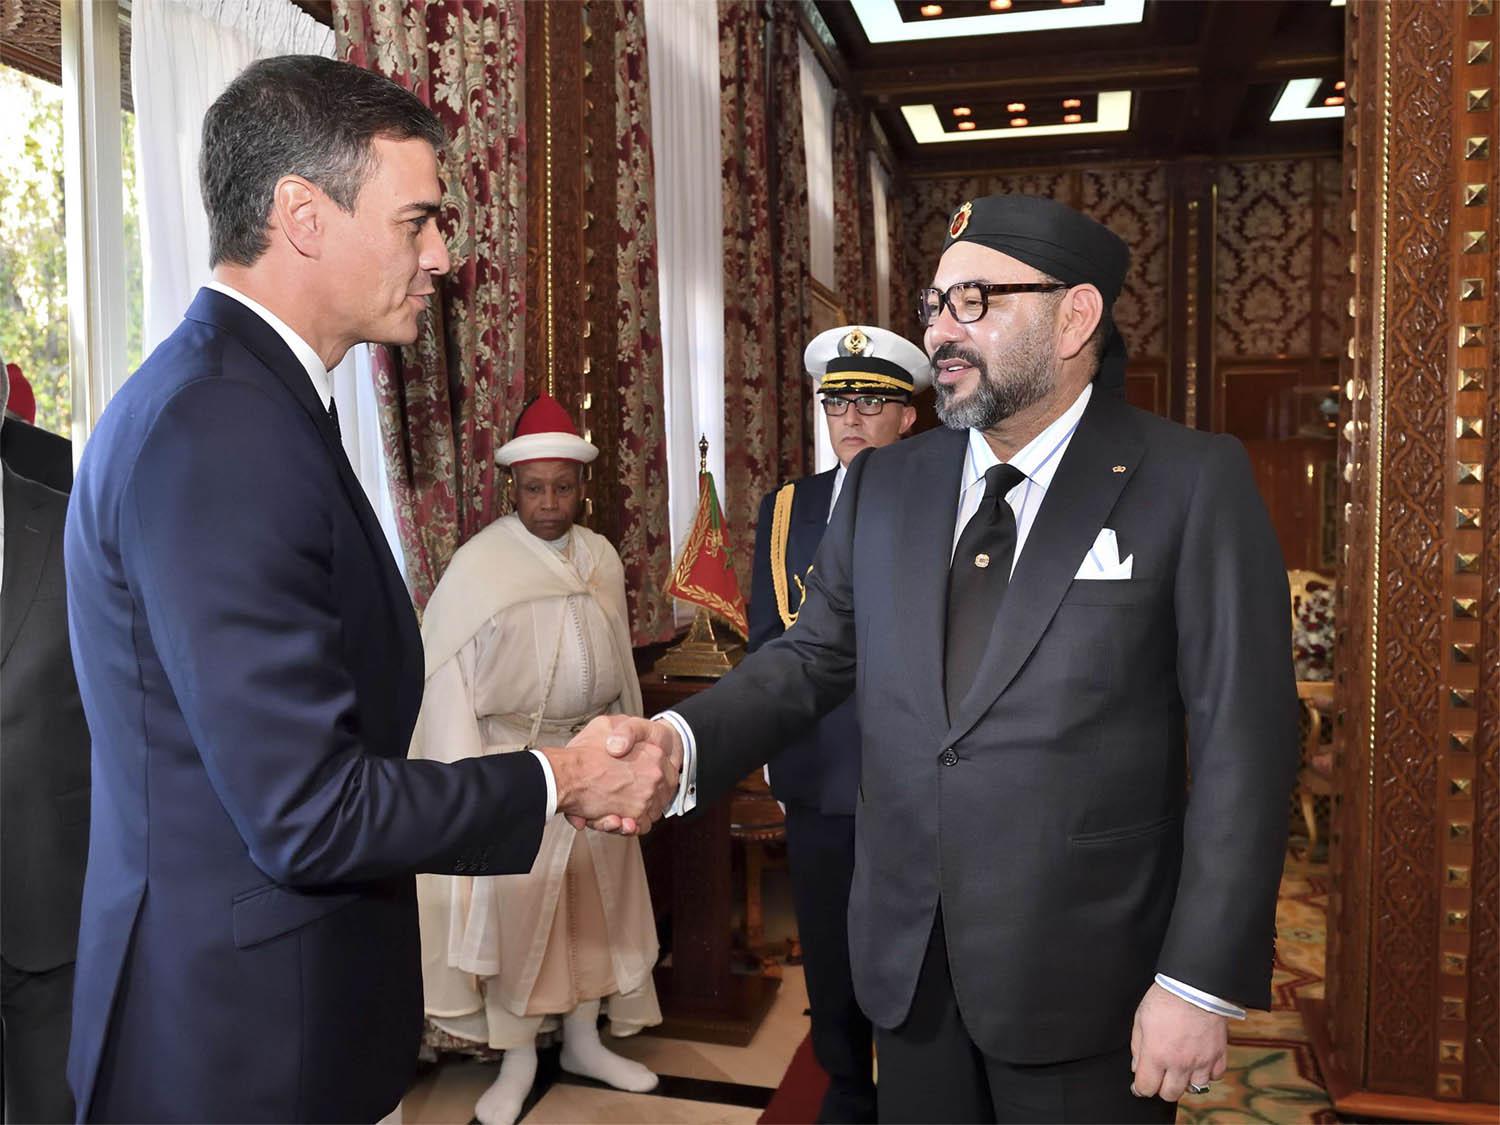 The last time Spanish PM visited Morocco was in November 2018